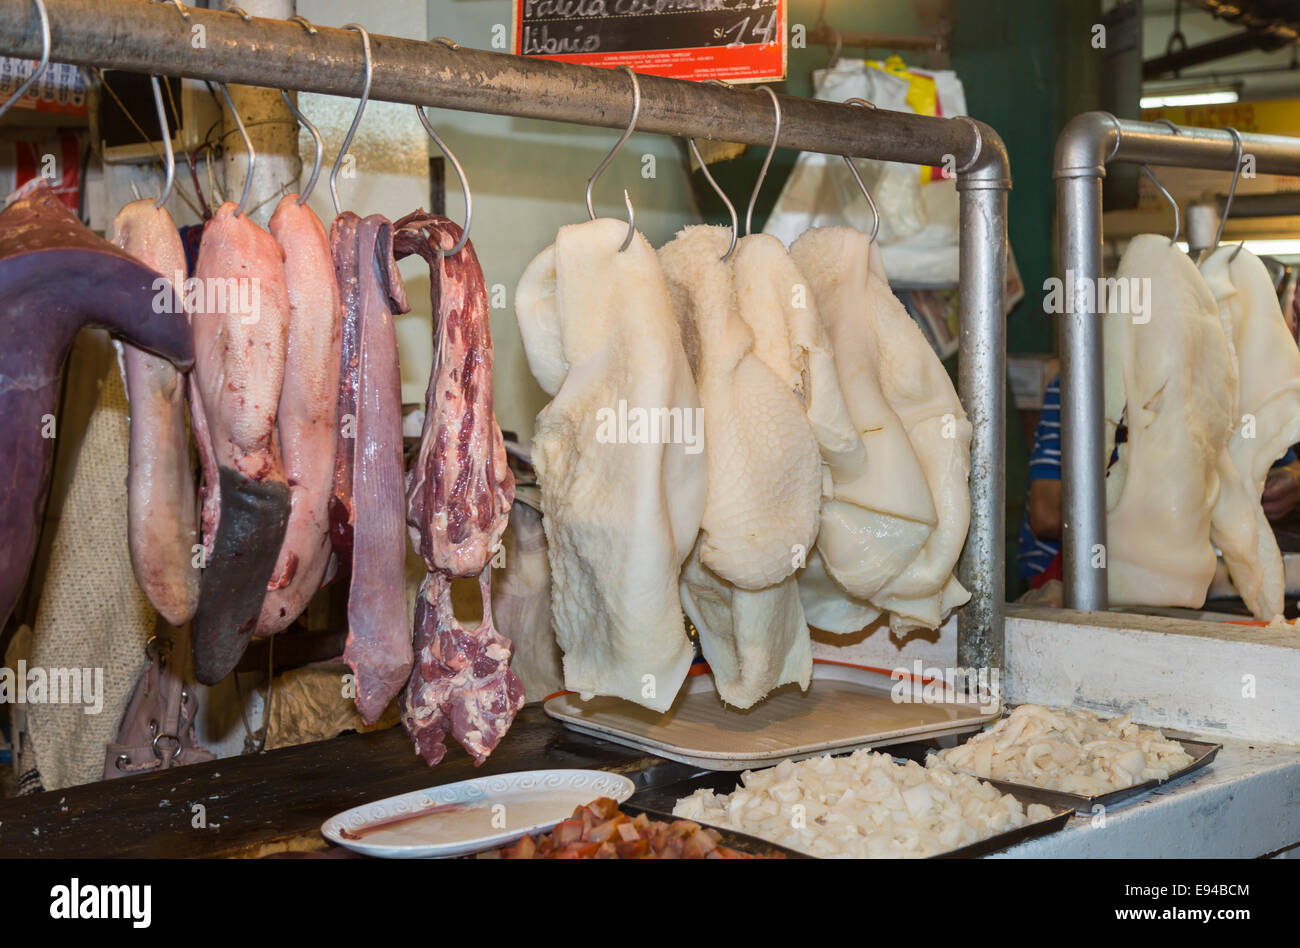 Tripe and offal displayed at a butcher's market stall at Surquillo Market, Miraflores, Lima, Peru Stock Photo